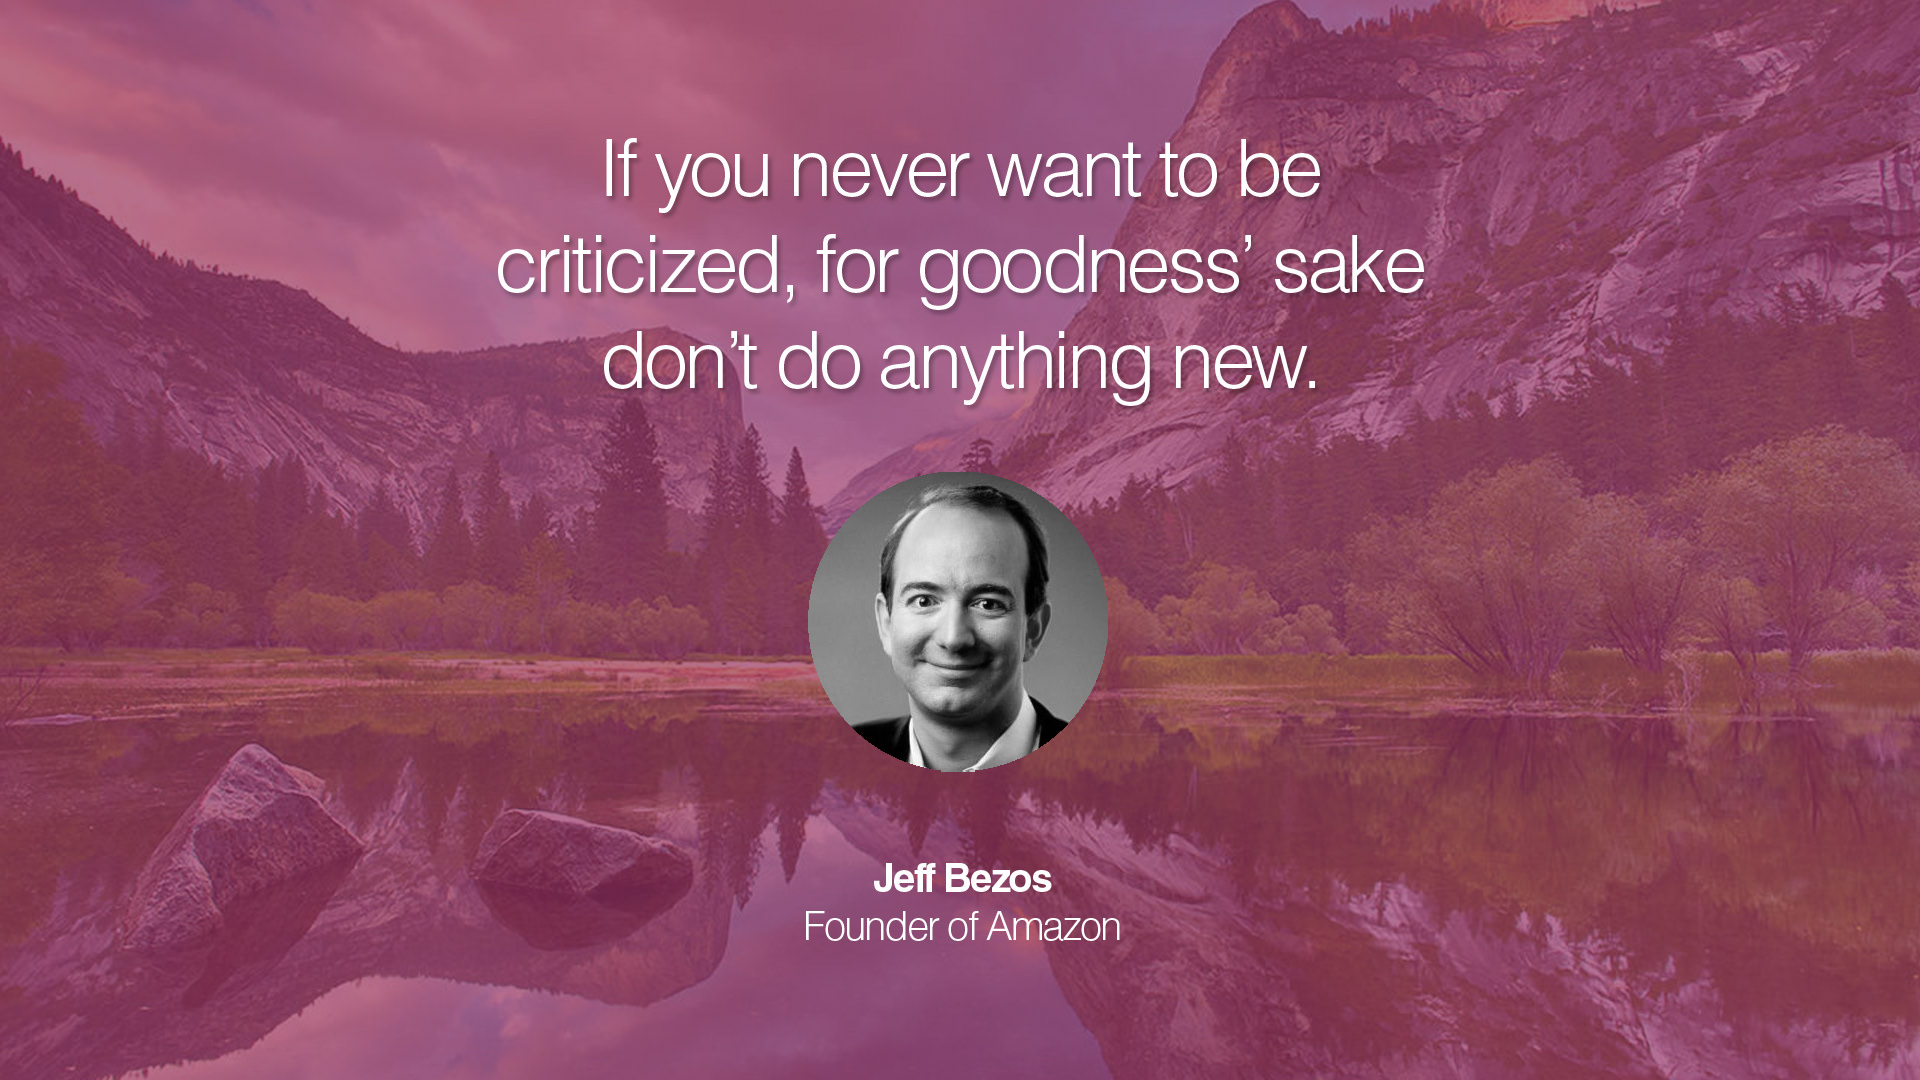 21 Inspirational Entrepreneur Quotes by Famous Billionaires and